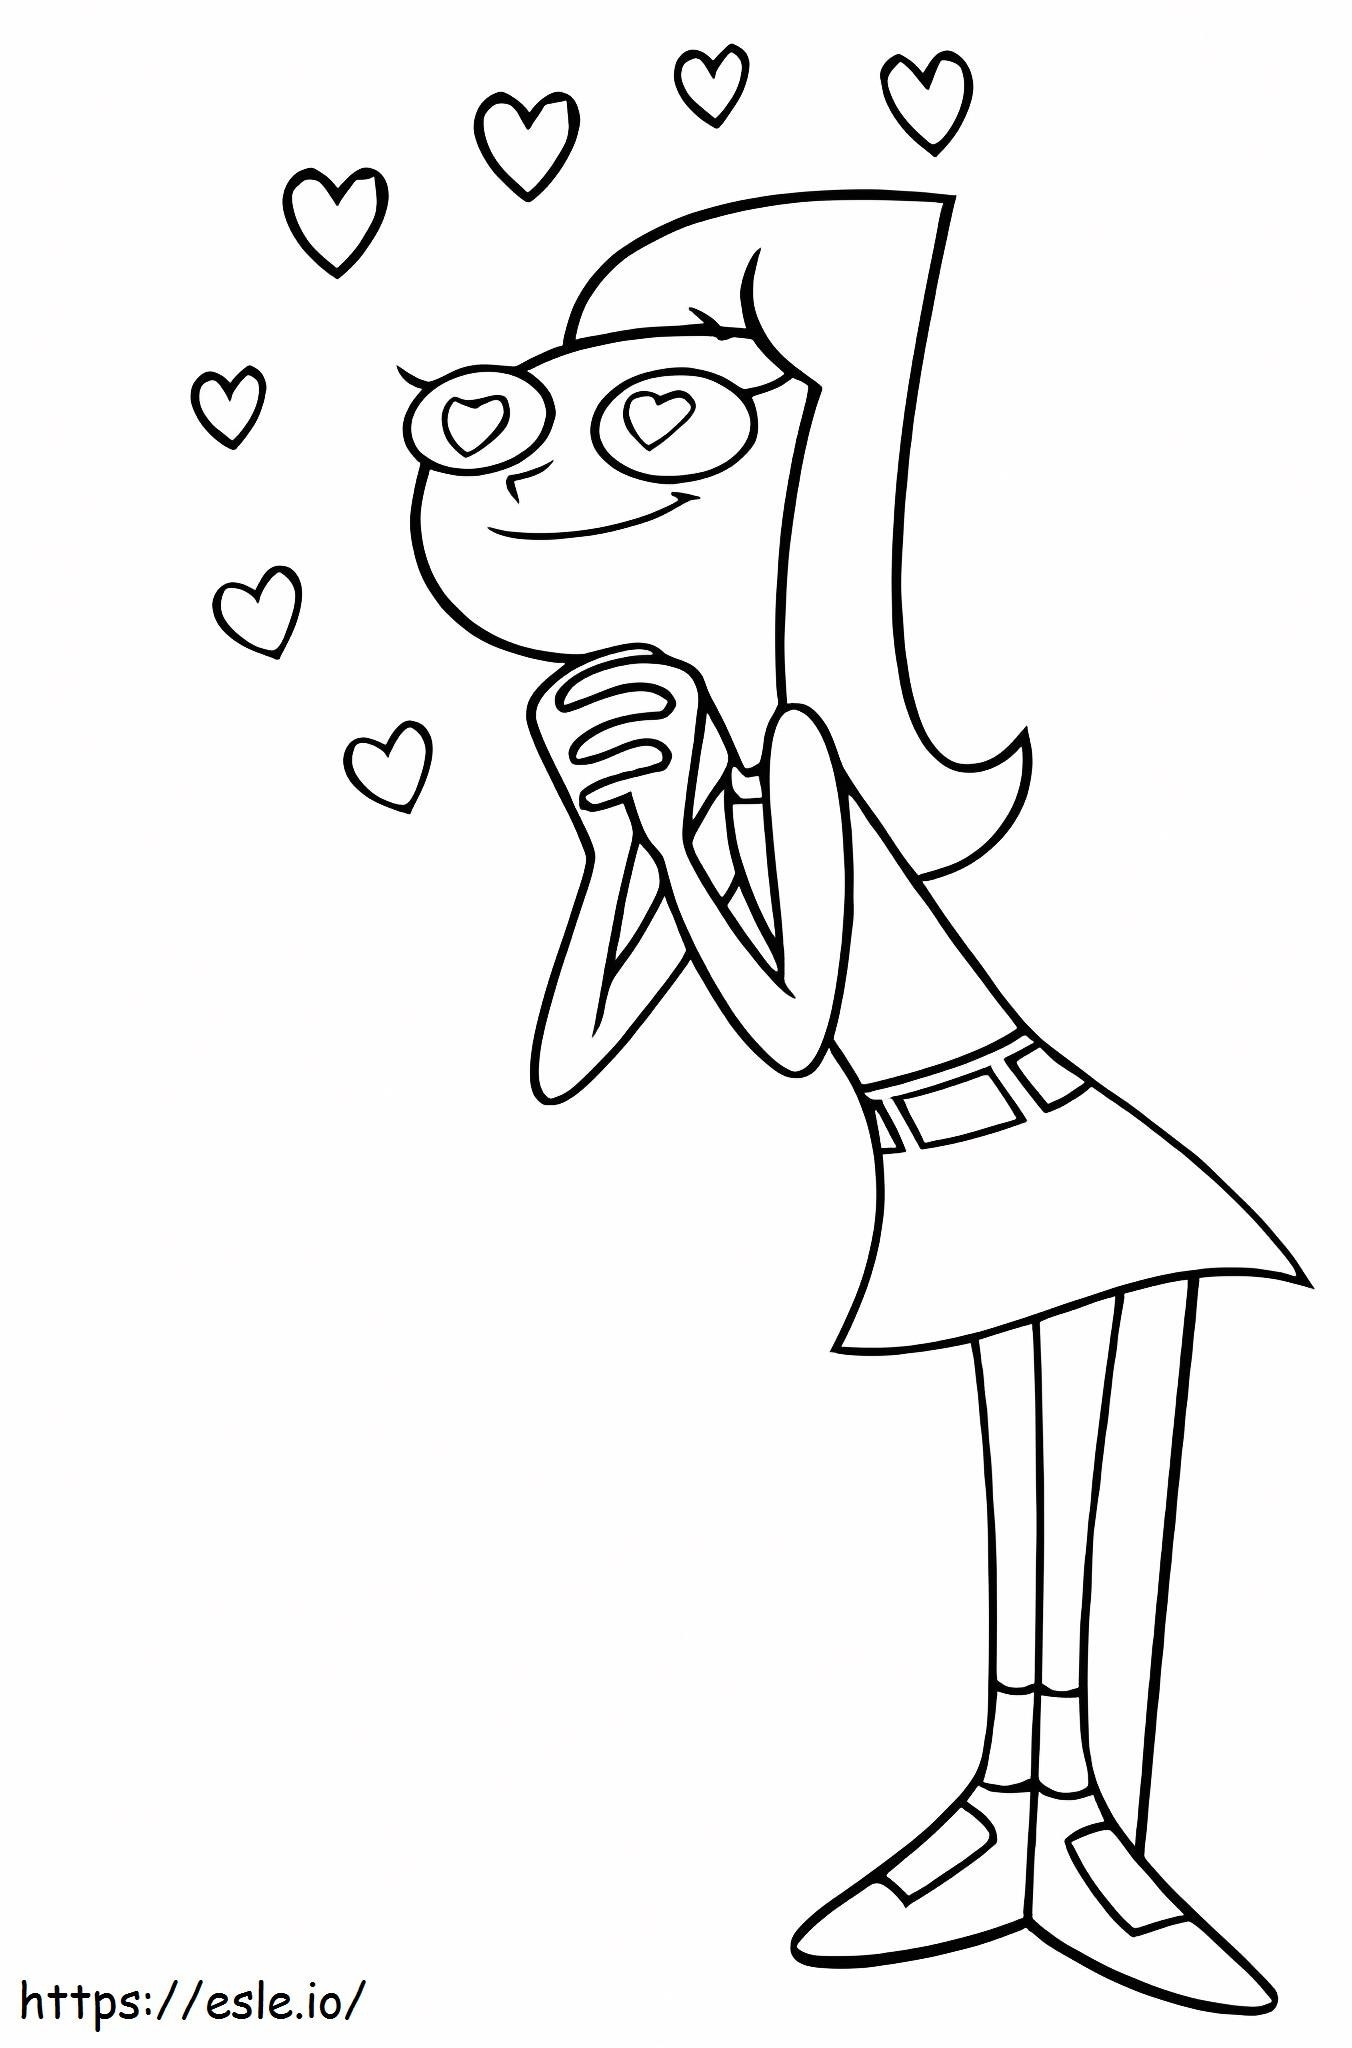 Good Candace coloring page